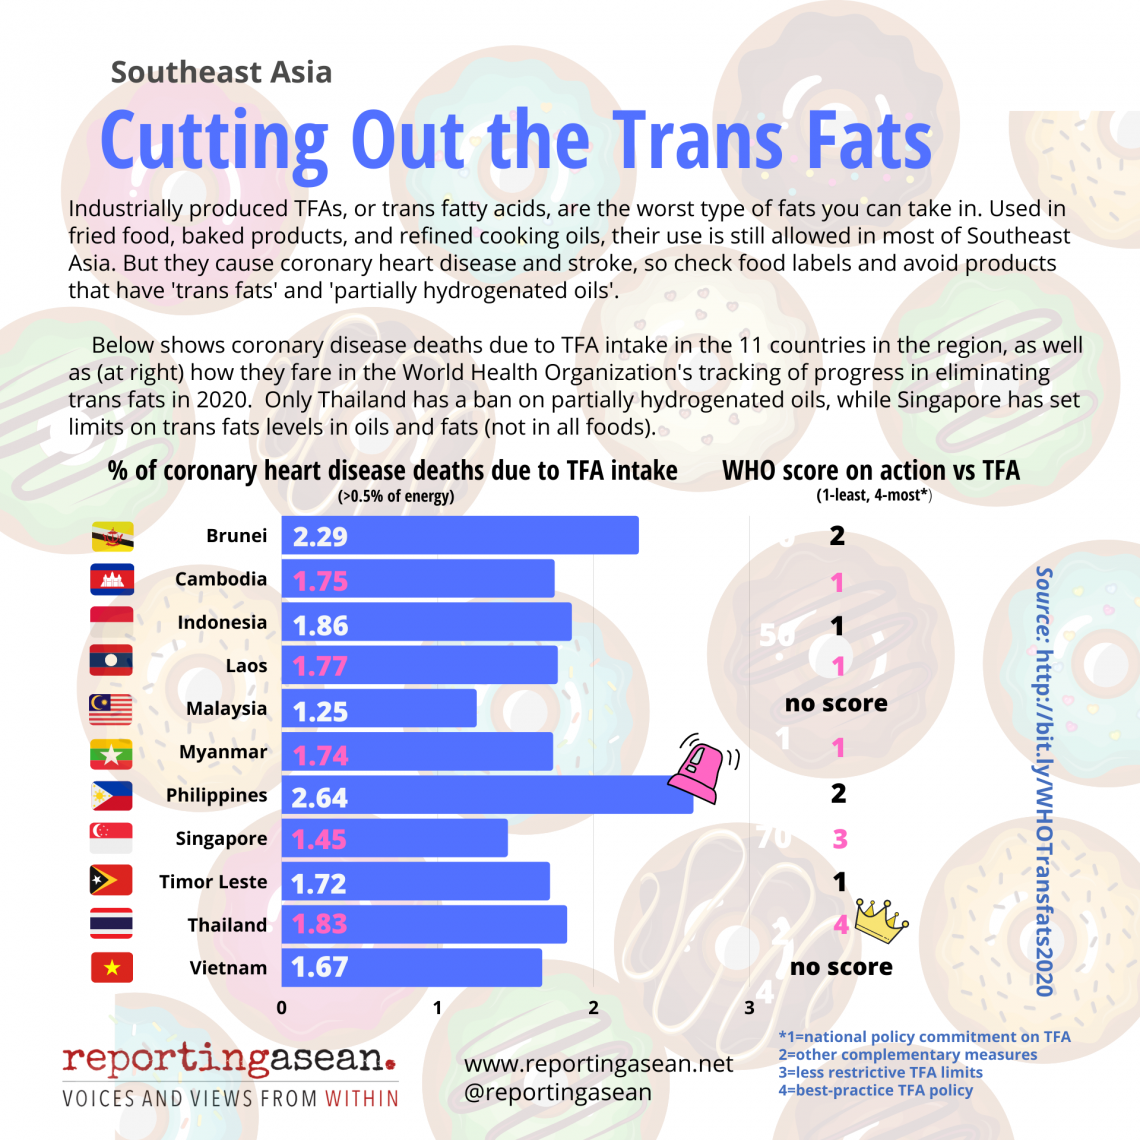 Cutting Out the Trans Fats